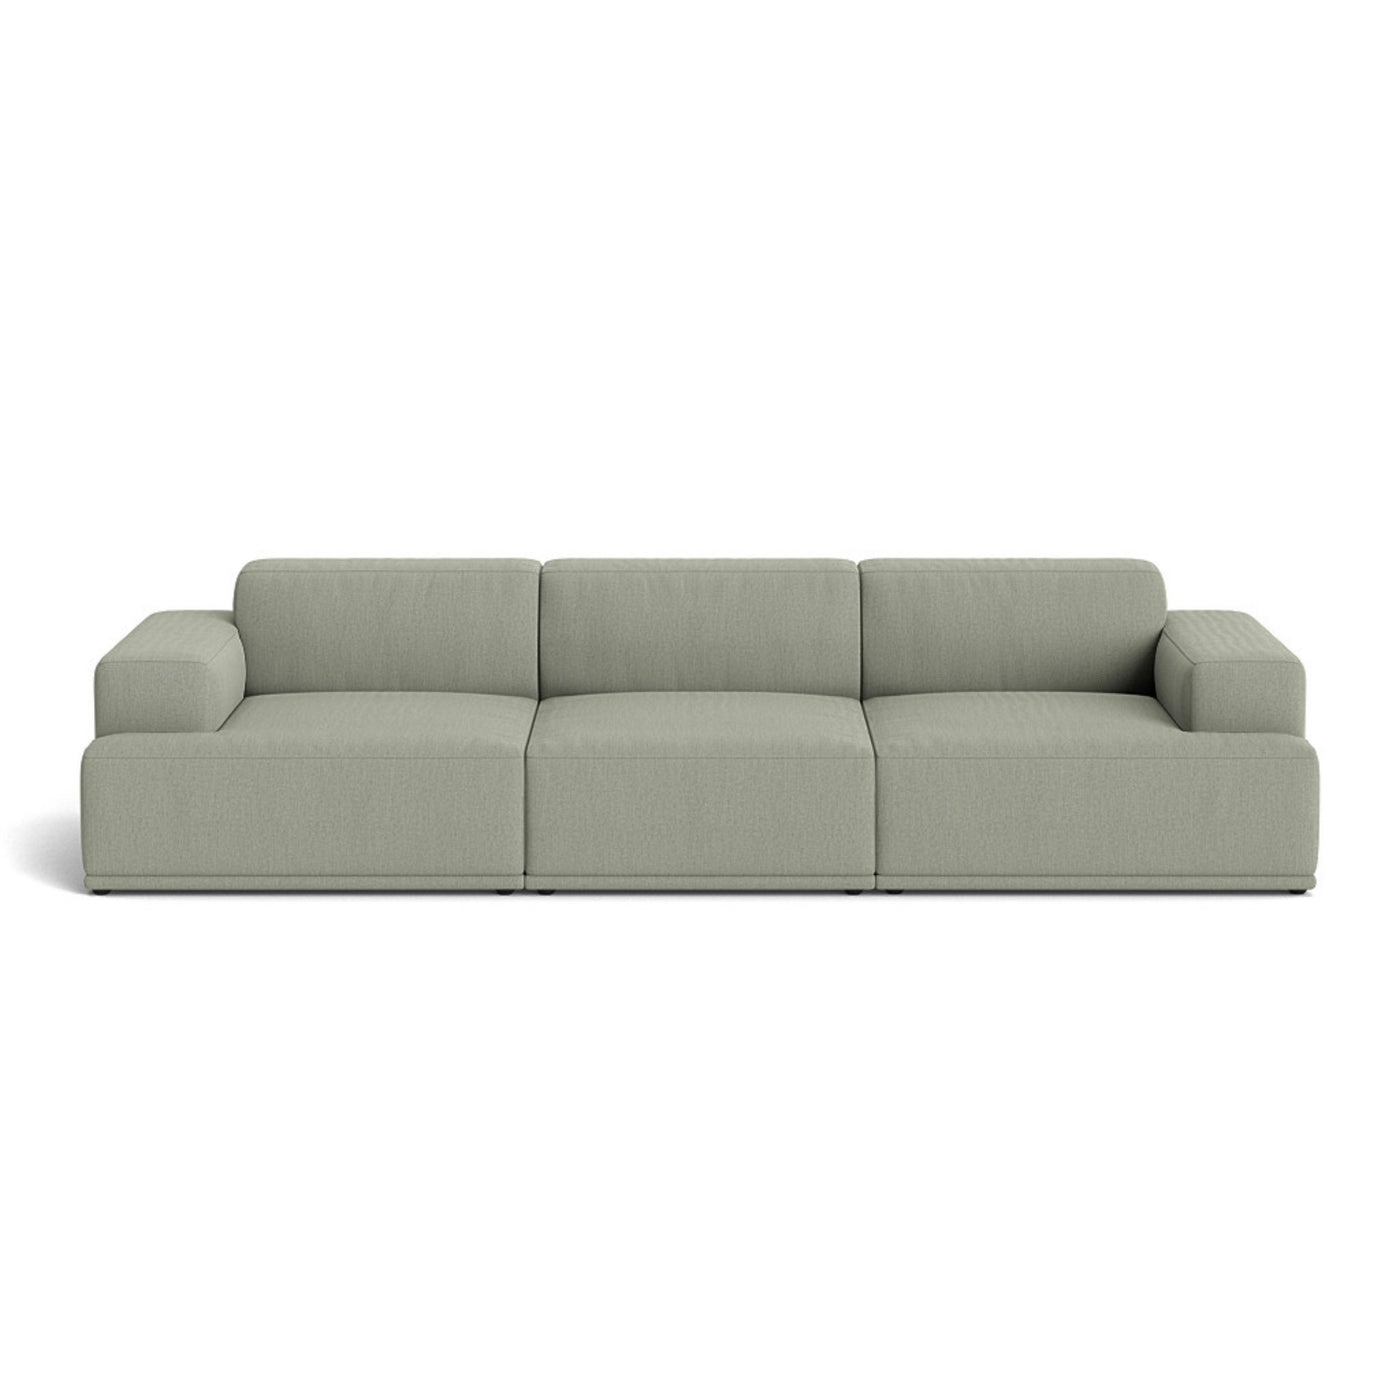 Muuto Connect Soft Modular 3 Seater Sofa, configuration 1. Made-to-order from someday designs. #colour_re-wool-408